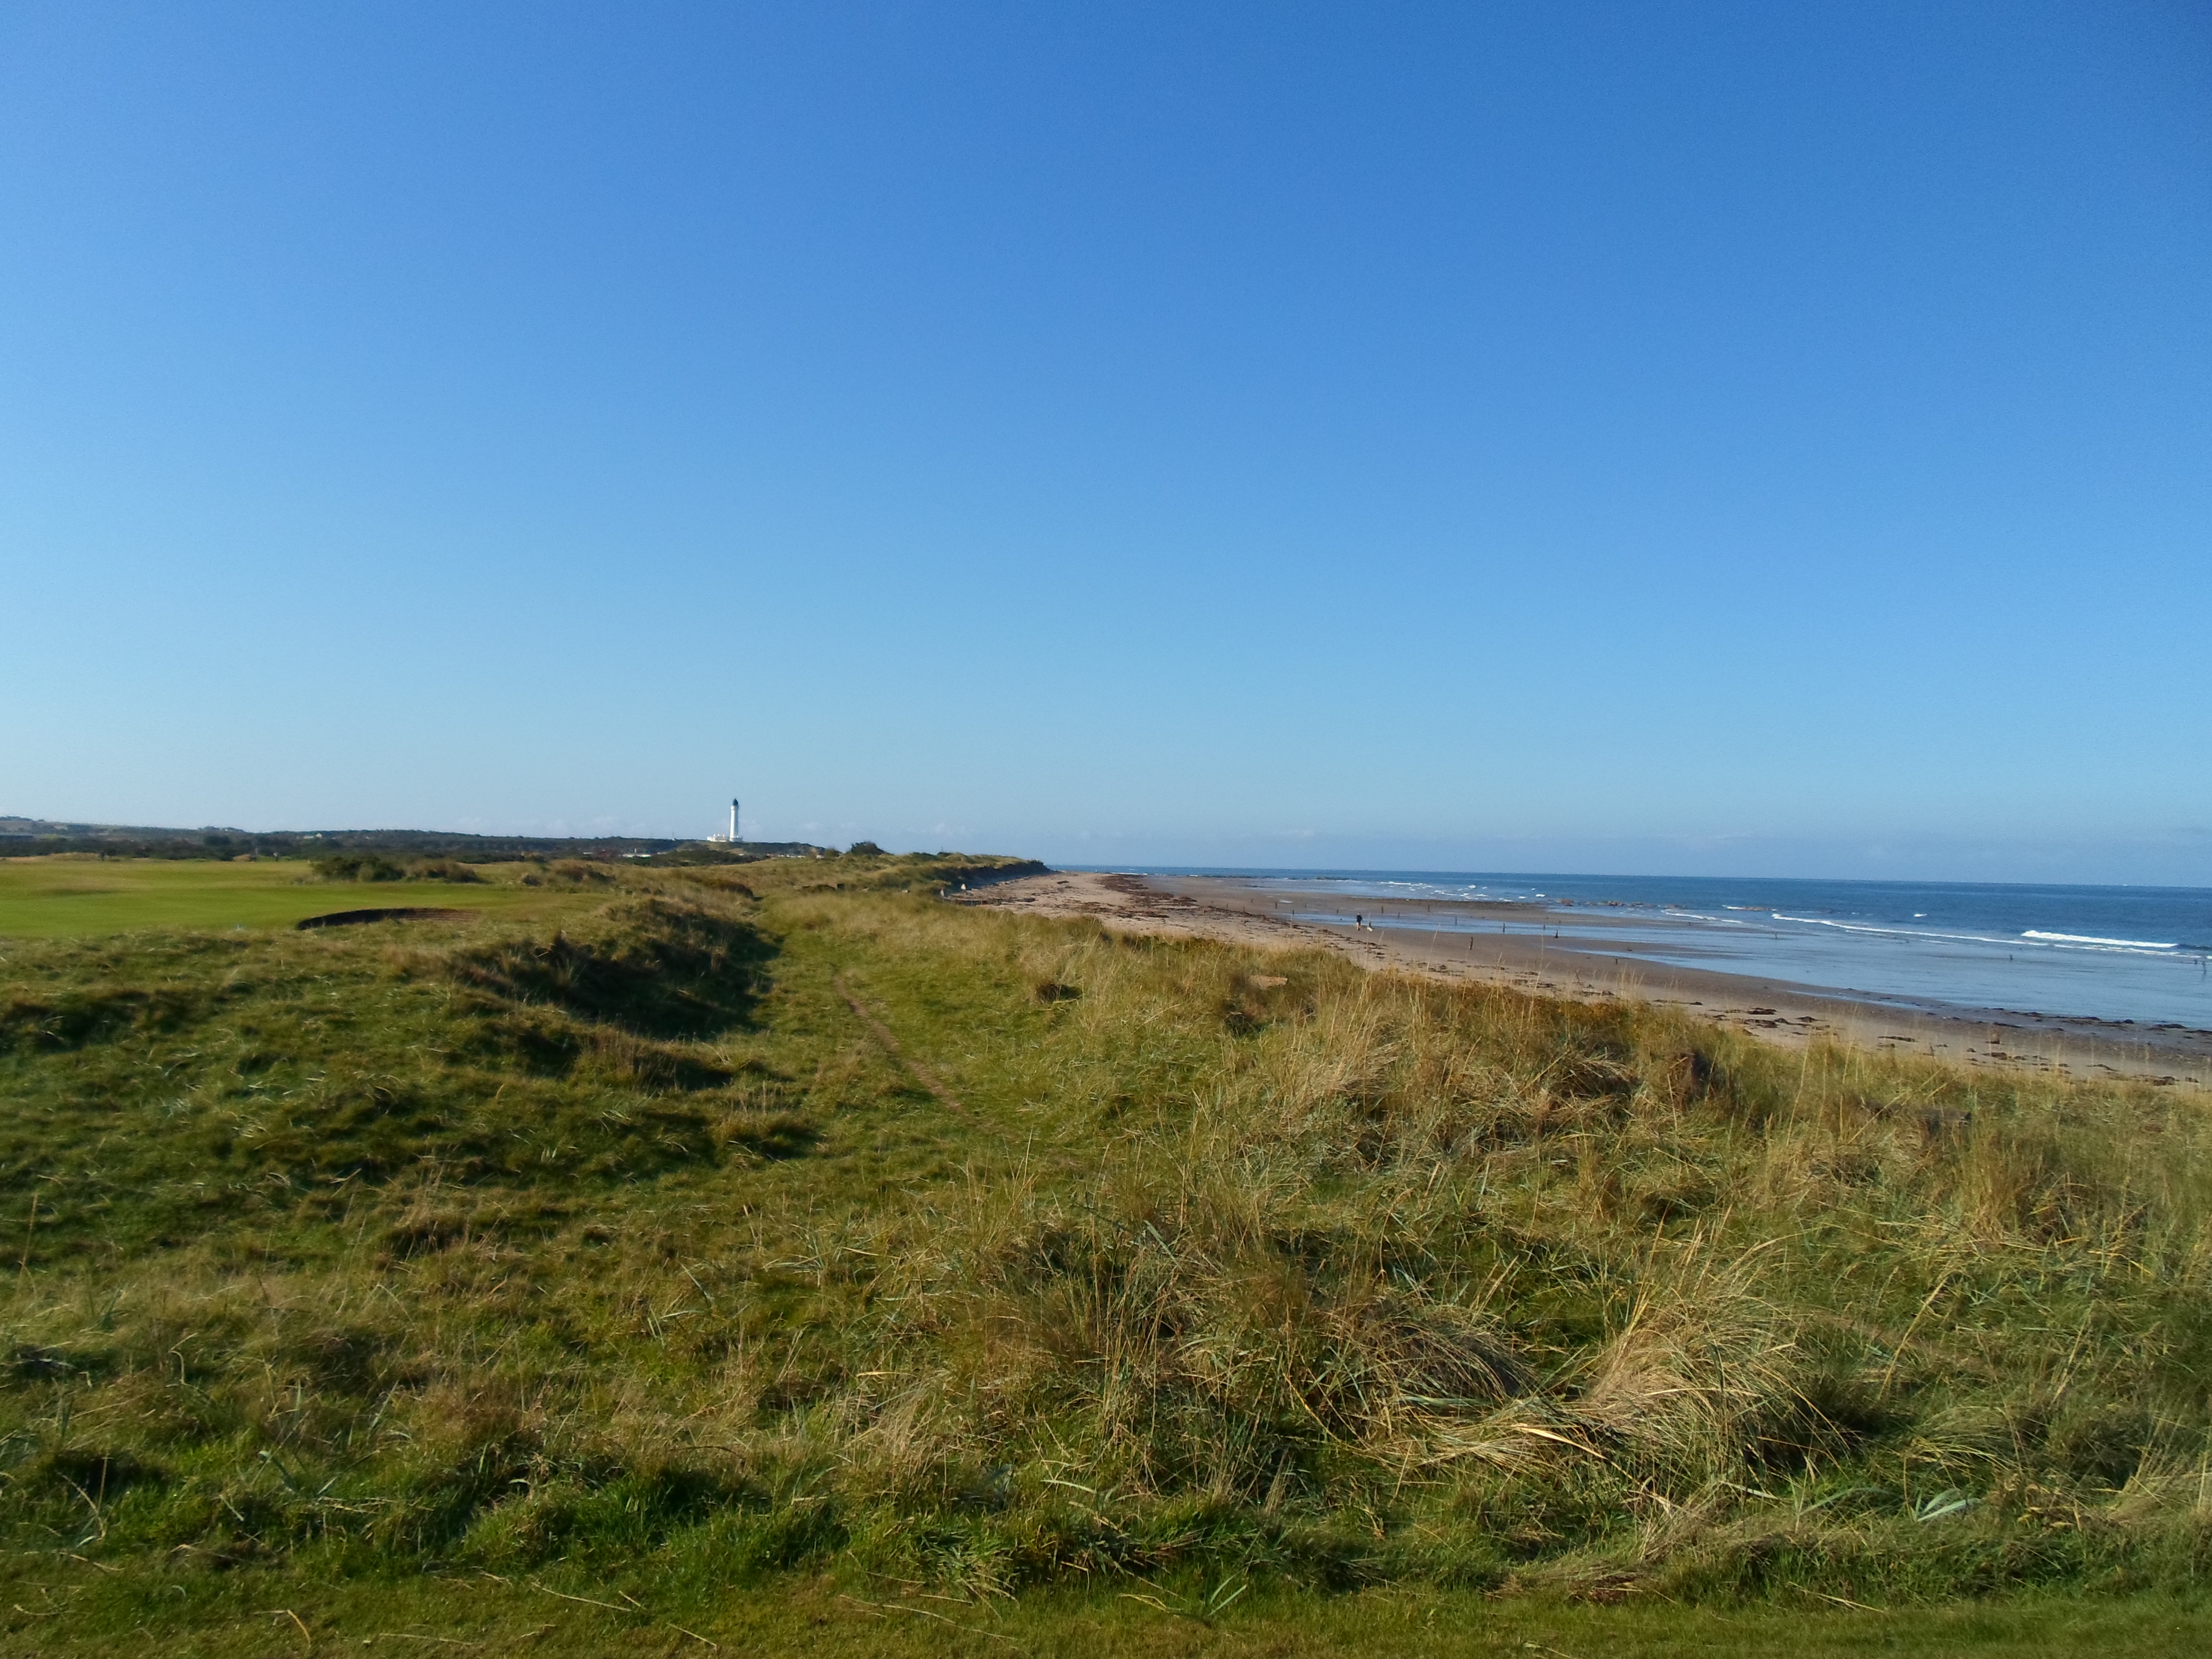 The Moray Firth laps the fairways